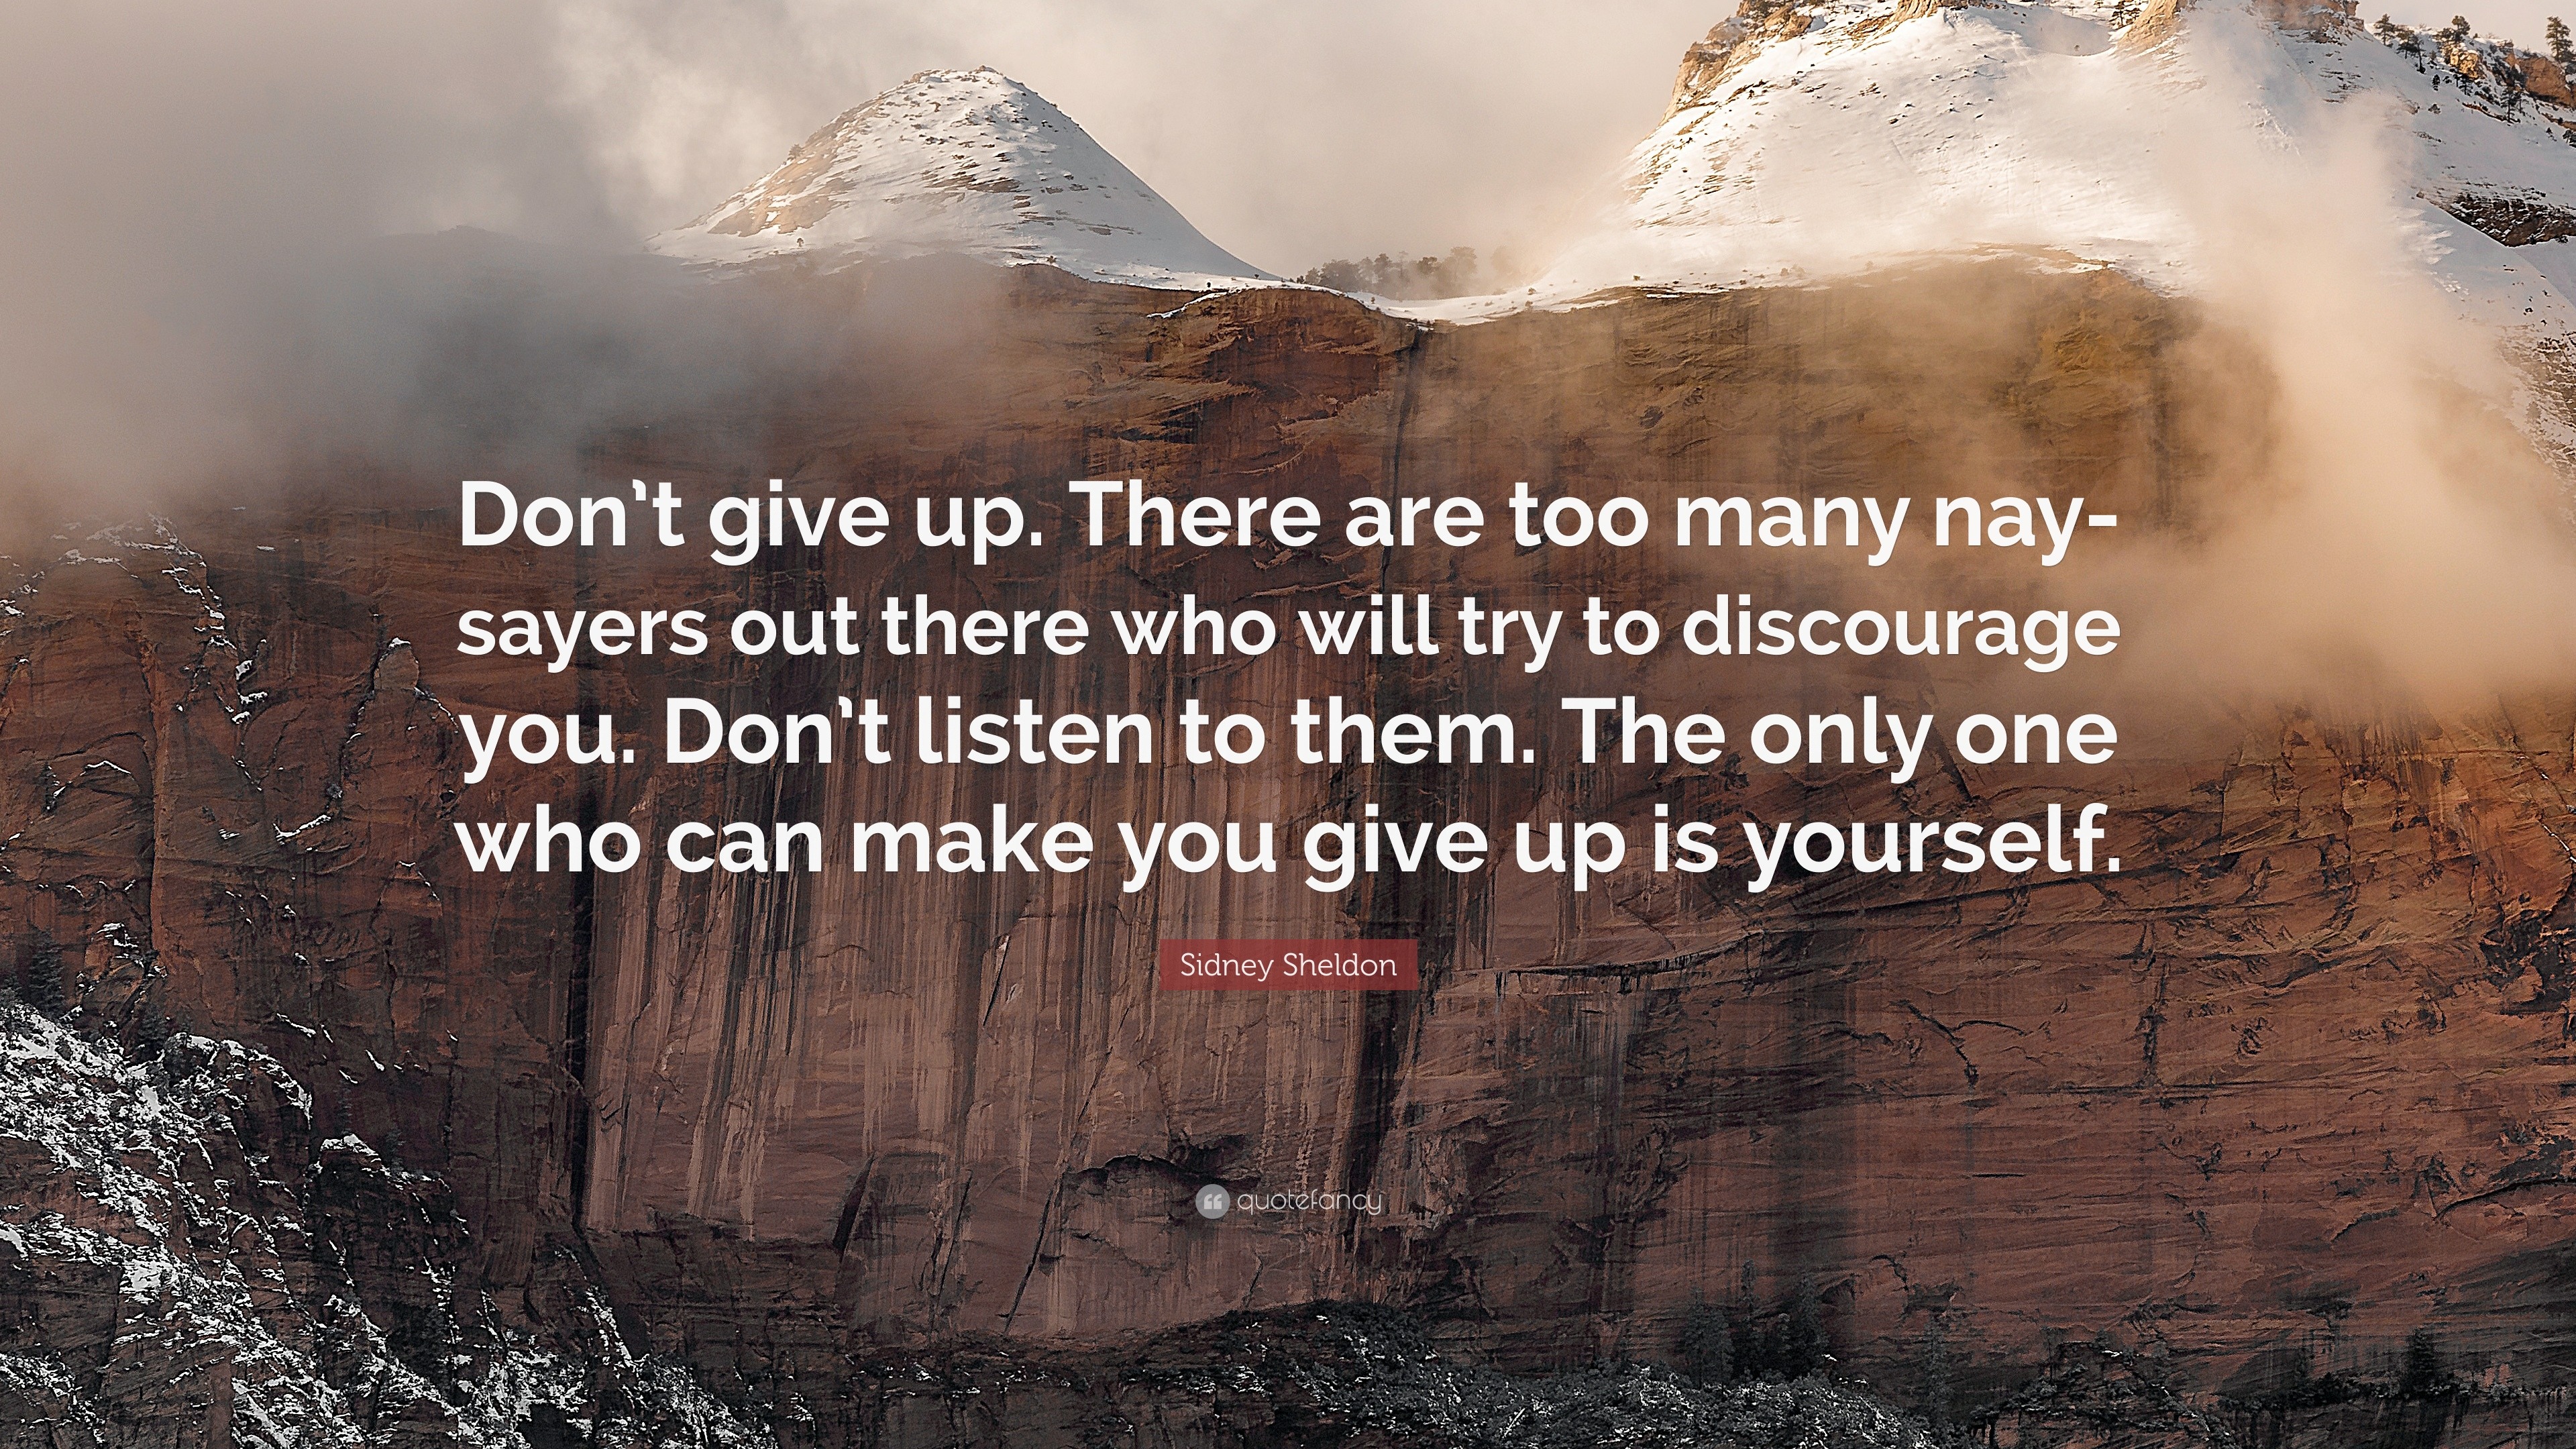 Sidney Sheldon Quote: “Don’t give up. There are too many nay-sayers out